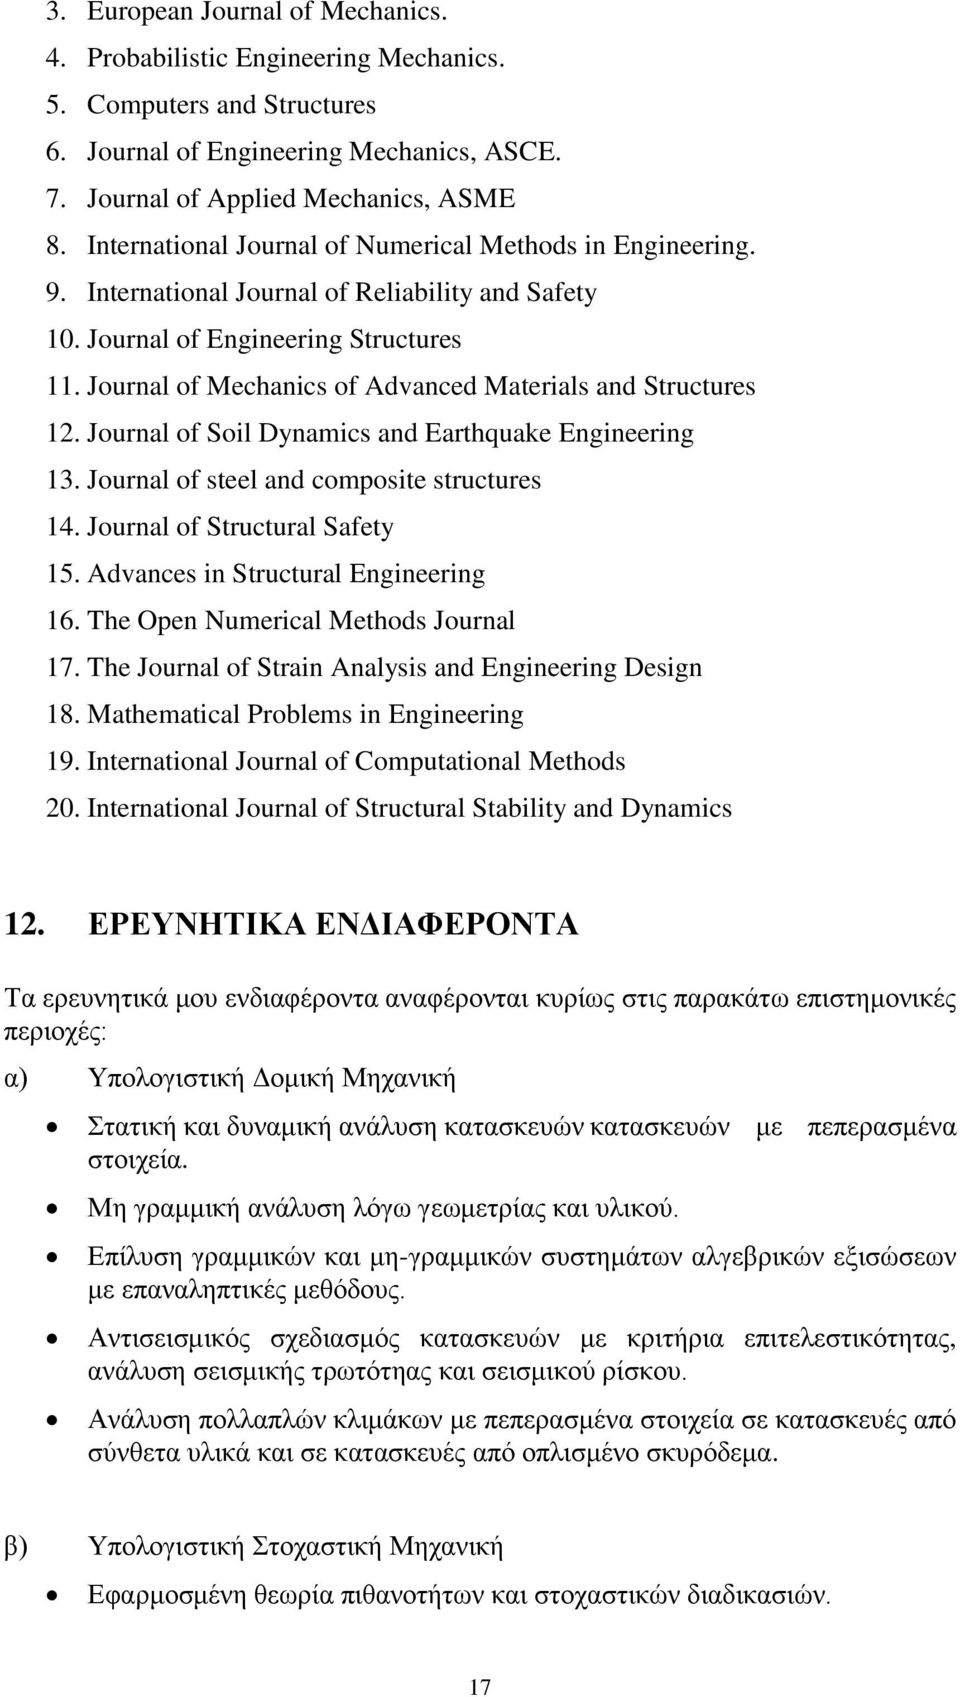 Journal of Mechanics of Advanced Materials and Structures 12. Journal of Soil Dynamics and Earthquake Engineering 13. Journal of steel and composite structures 14. Journal of Structural Safety 15.